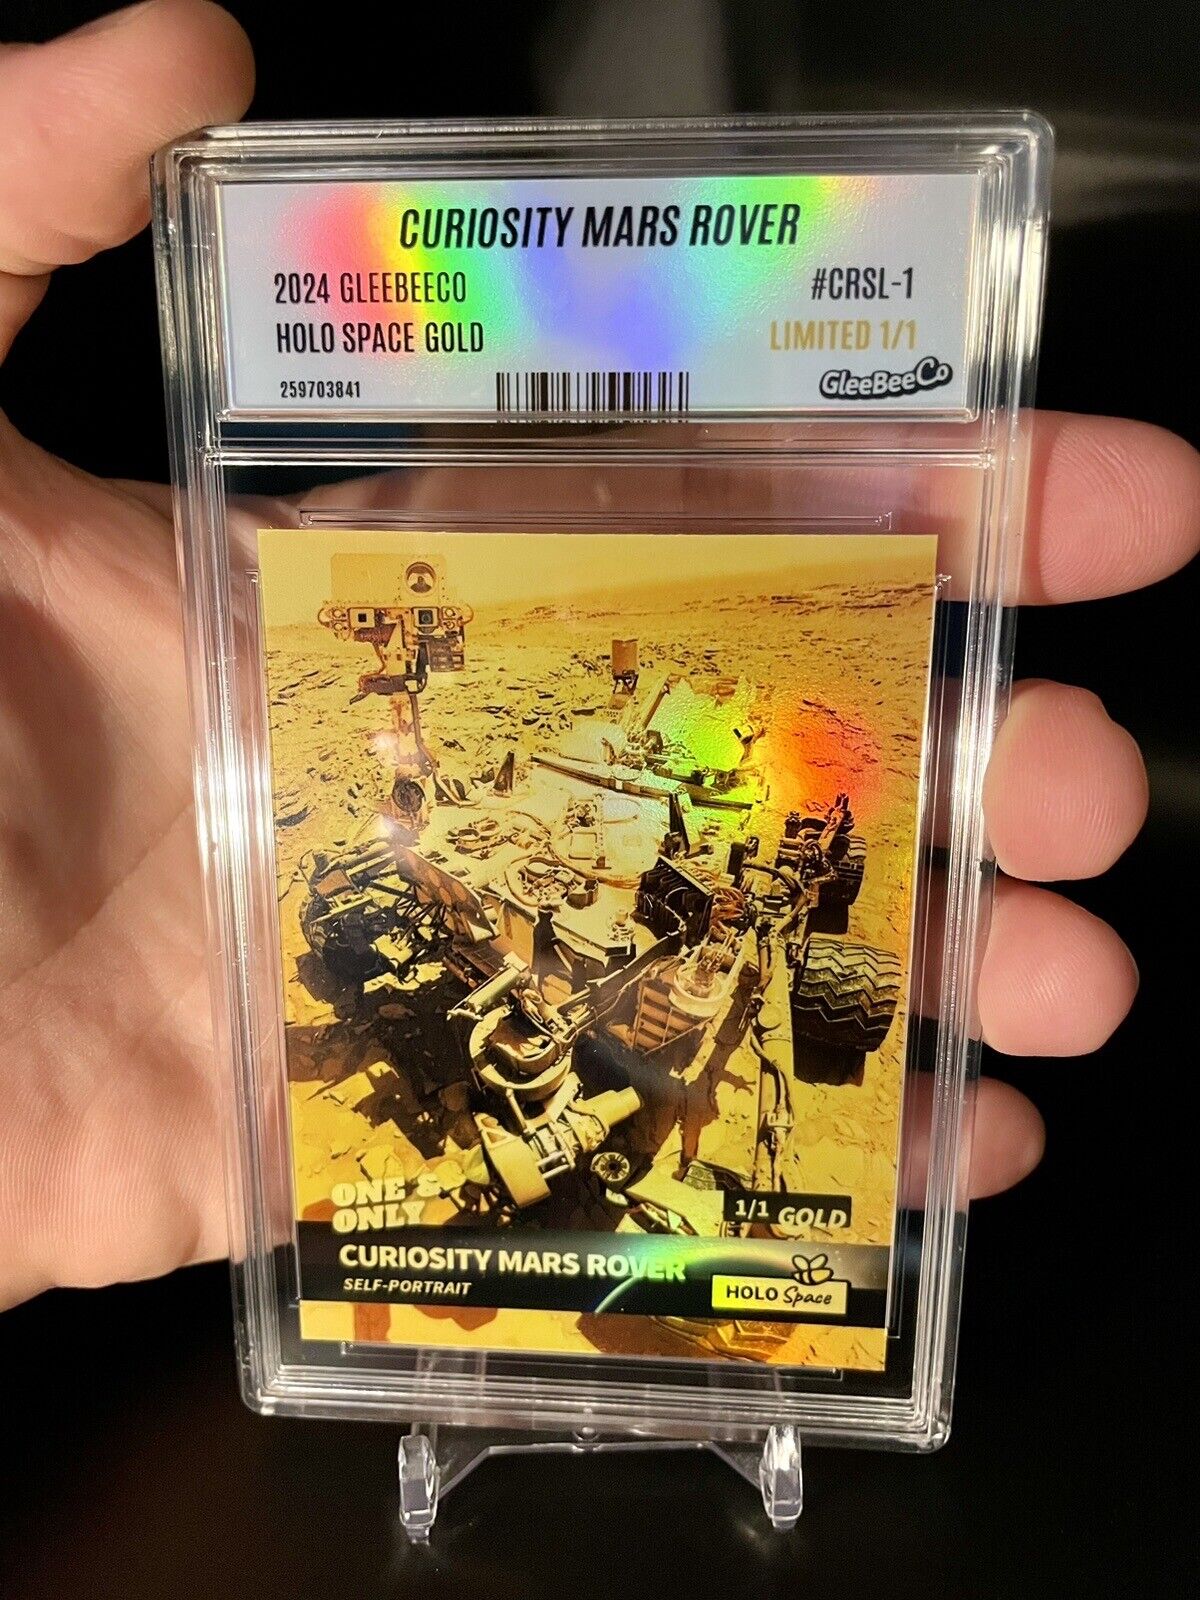 One & Only CURIOSITY MARS ROVER Self-portrait Card, Holo Gold GleeBeeCo 2024 1/1